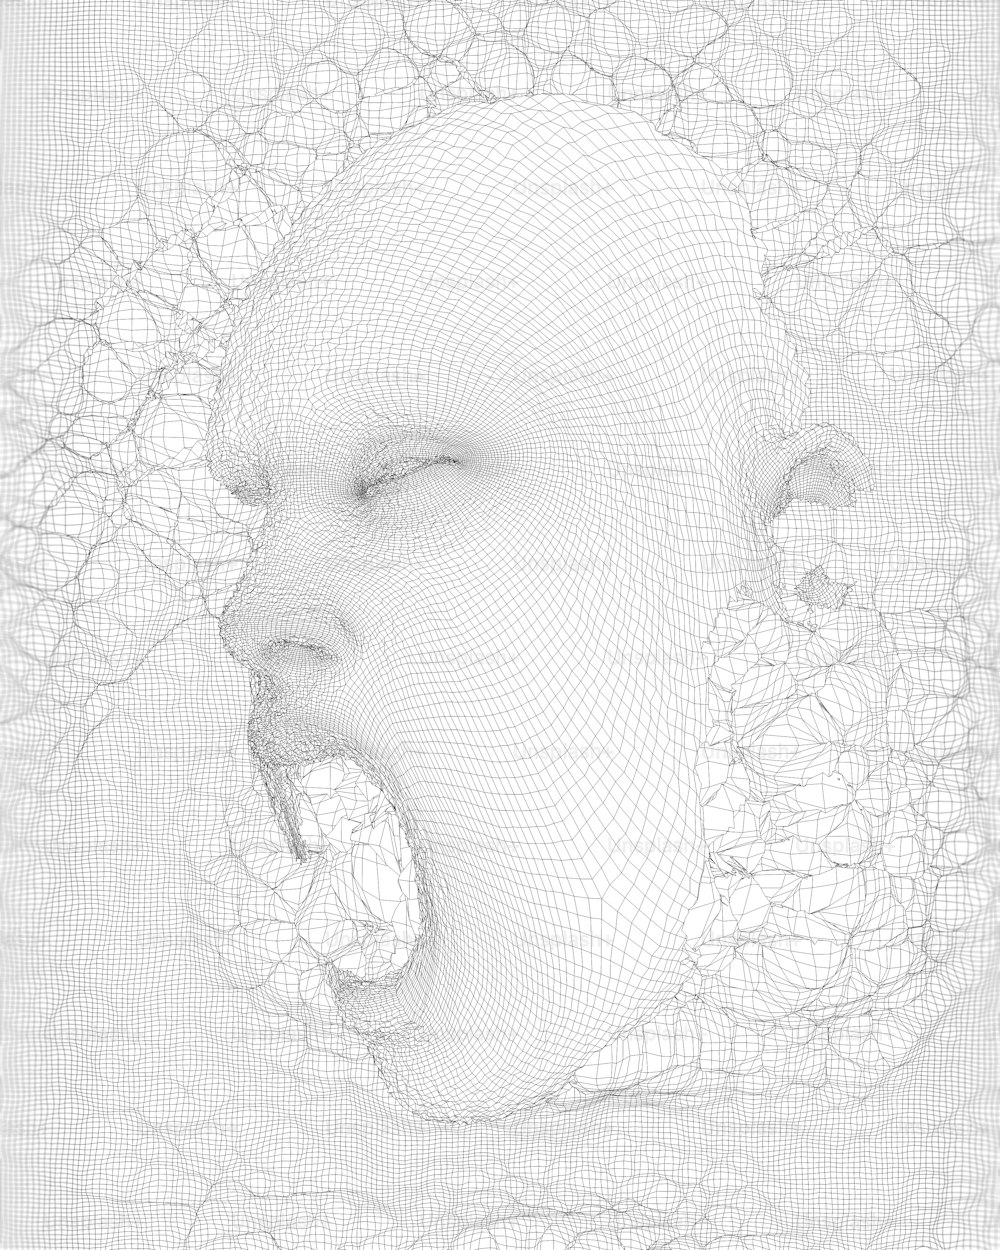 a drawing of a person's head with a wire mesh covering it